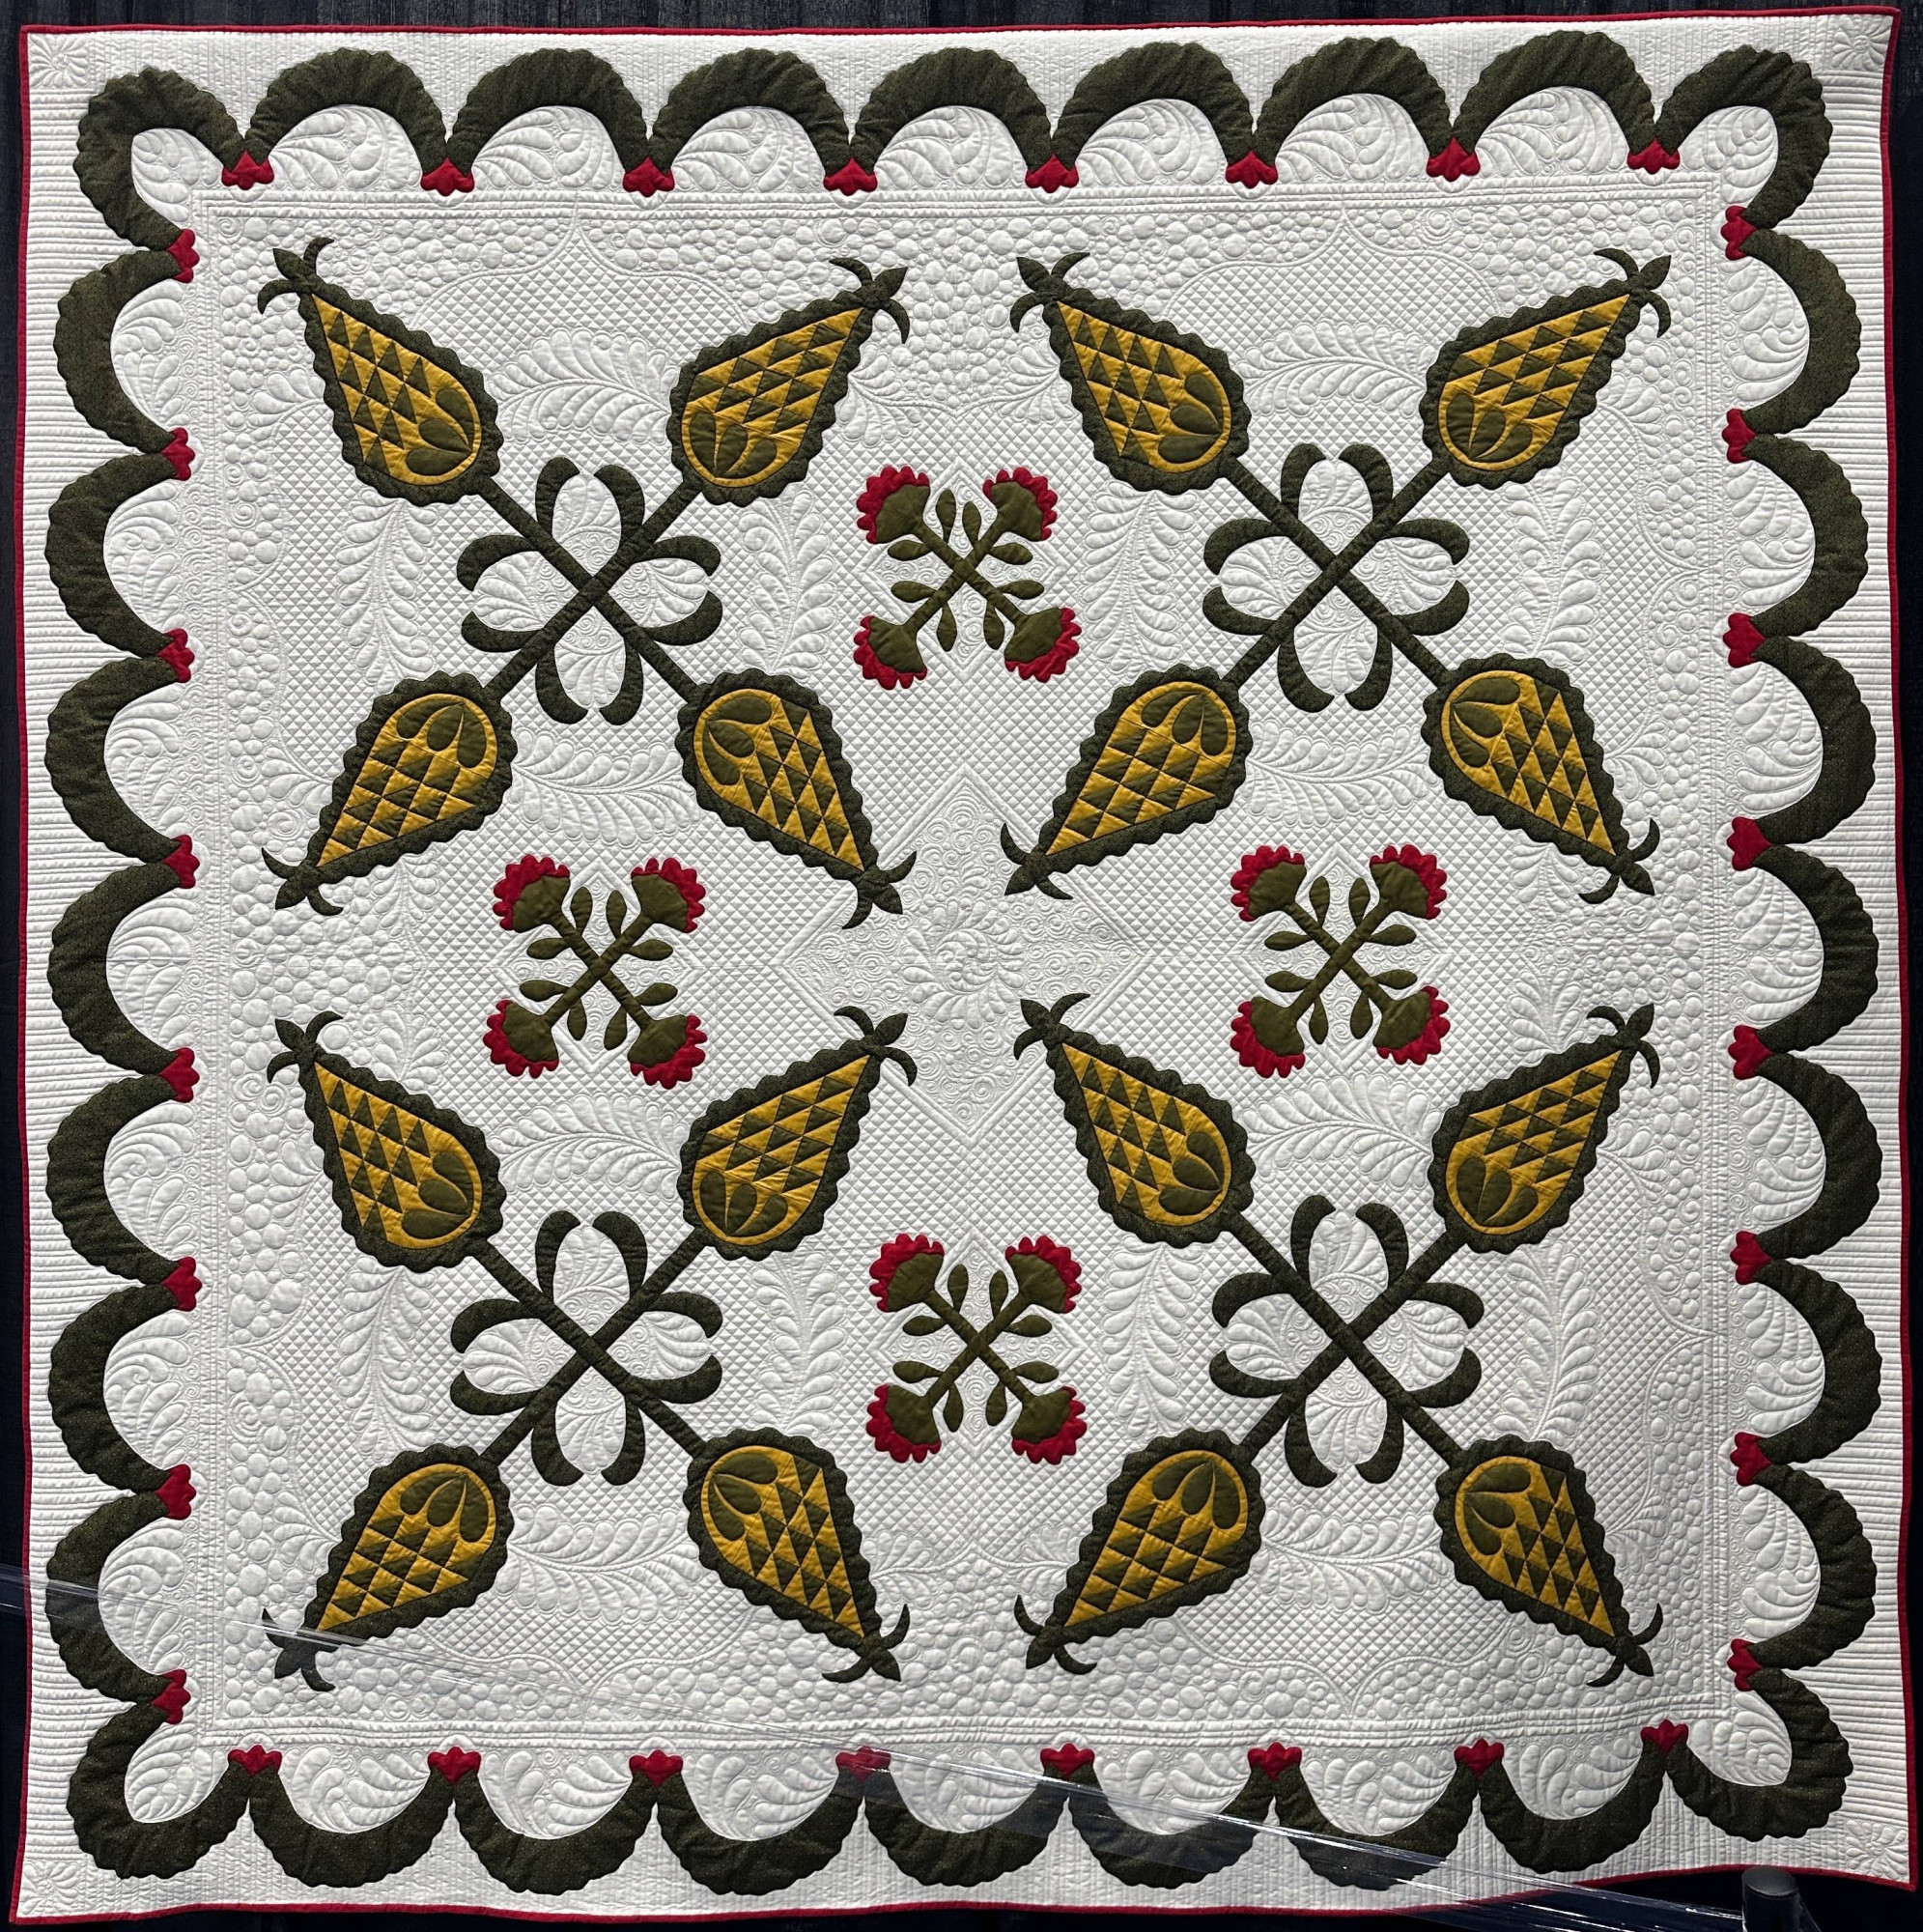 Antique Pineapple by Sandra Pritchard, Quilted by April Wells